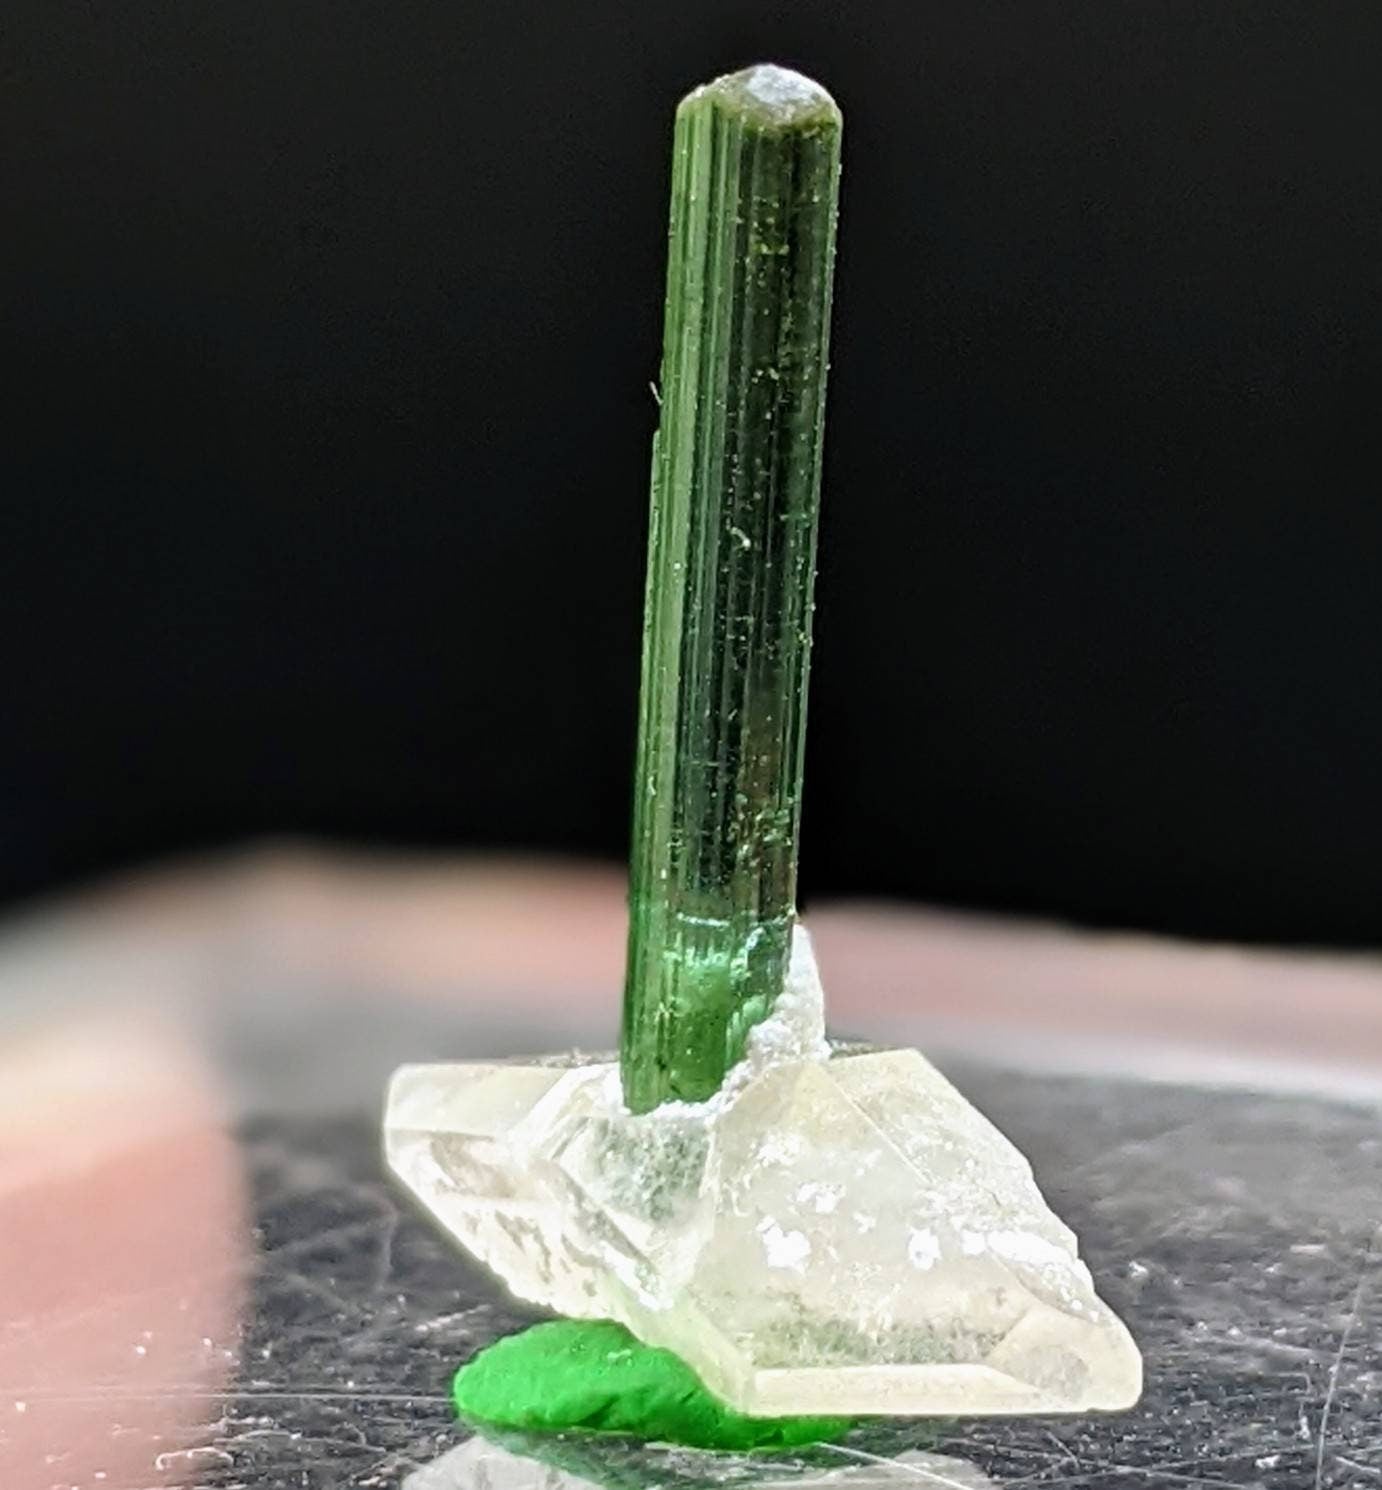 ARSAA GEMS AND MINERALSSmall thumbnail size terminated green tourmaline crystal on matrix on quartz, 0.8 grams - Premium  from ARSAA GEMS AND MINERALS - Just $15.00! Shop now at ARSAA GEMS AND MINERALS